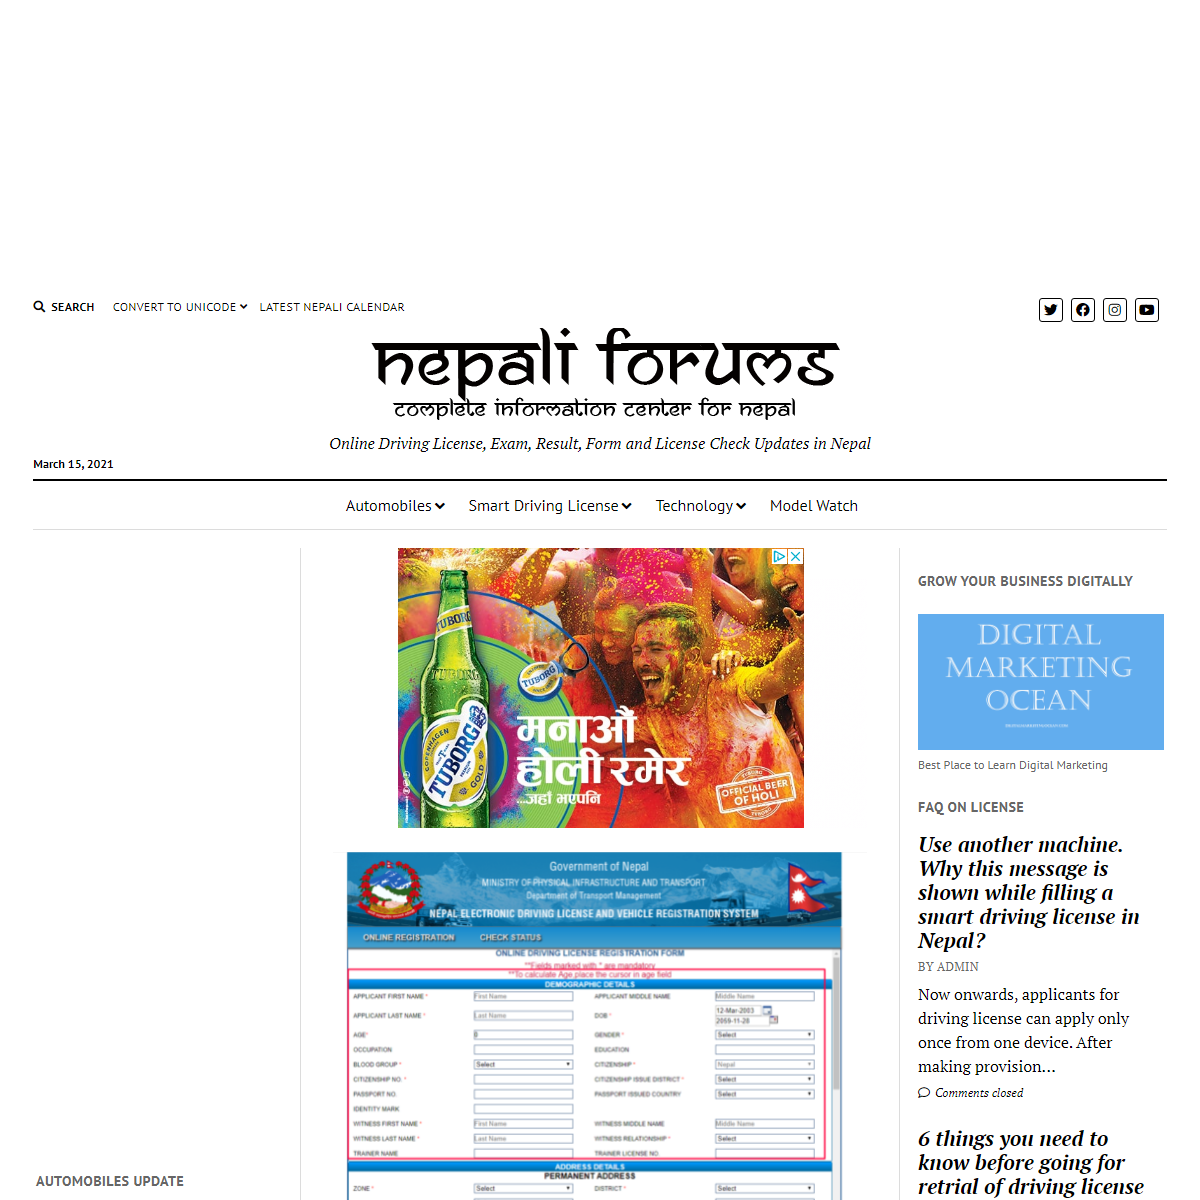 A complete backup of https://nepaliforums.com/how-to-fill-driving-license-form-in-nepal-online/